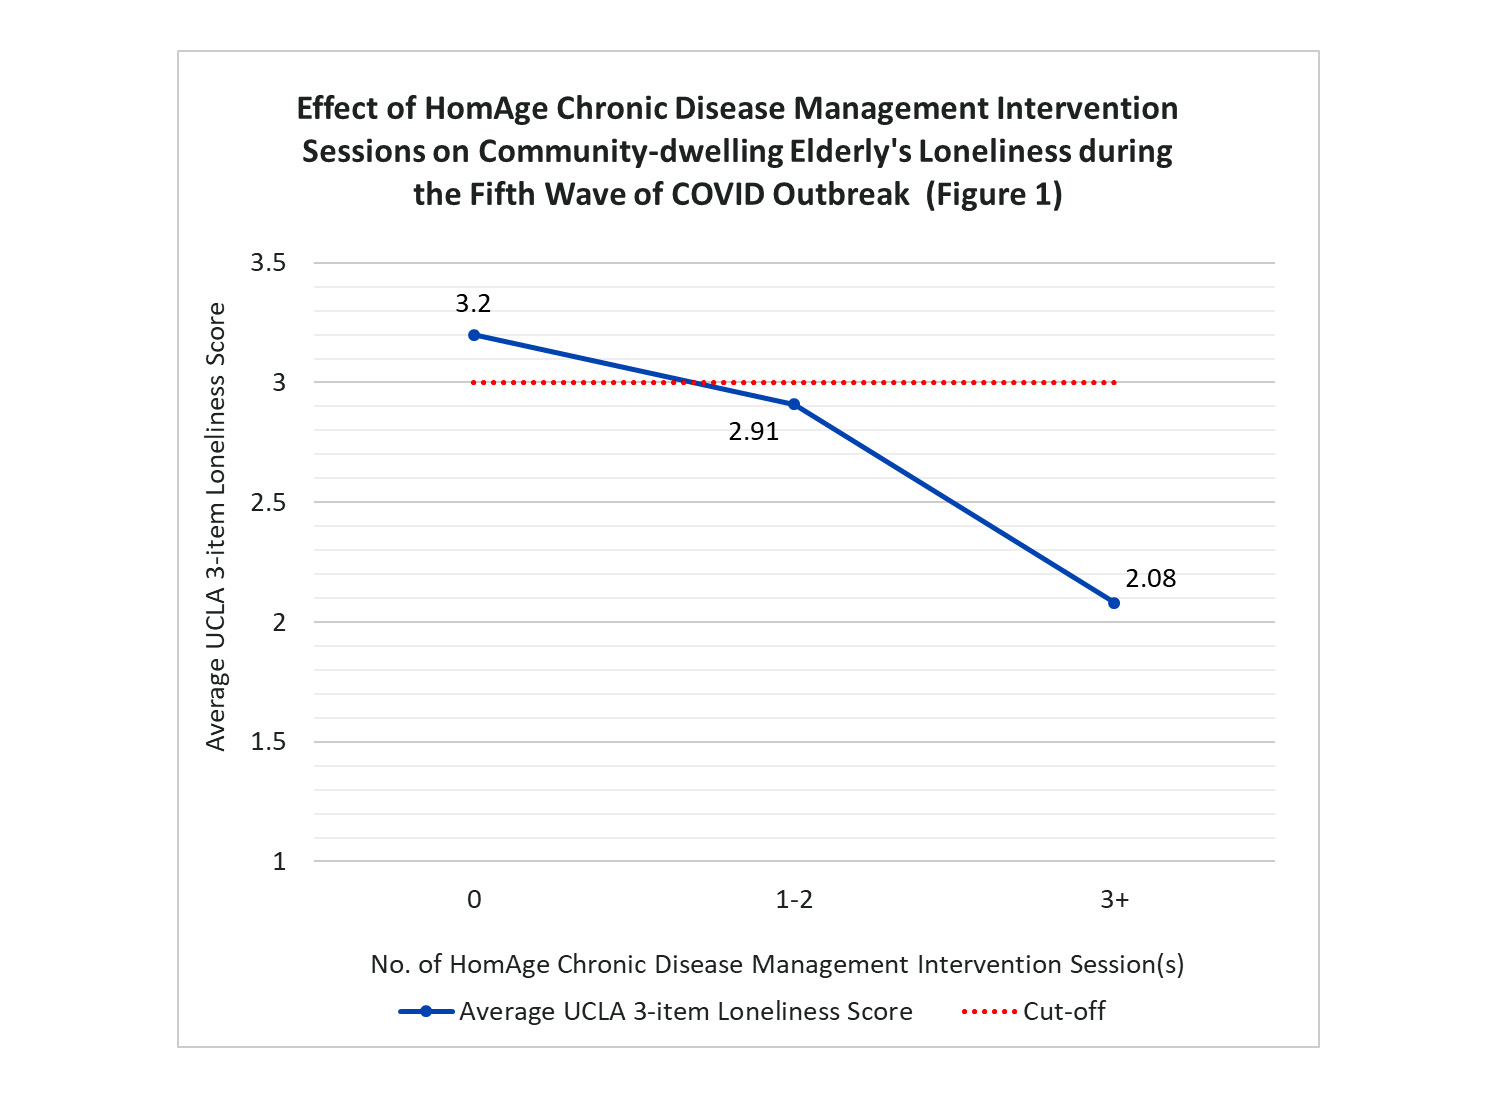 Figure 1: Effect of chronic disease management sessions on loneliness